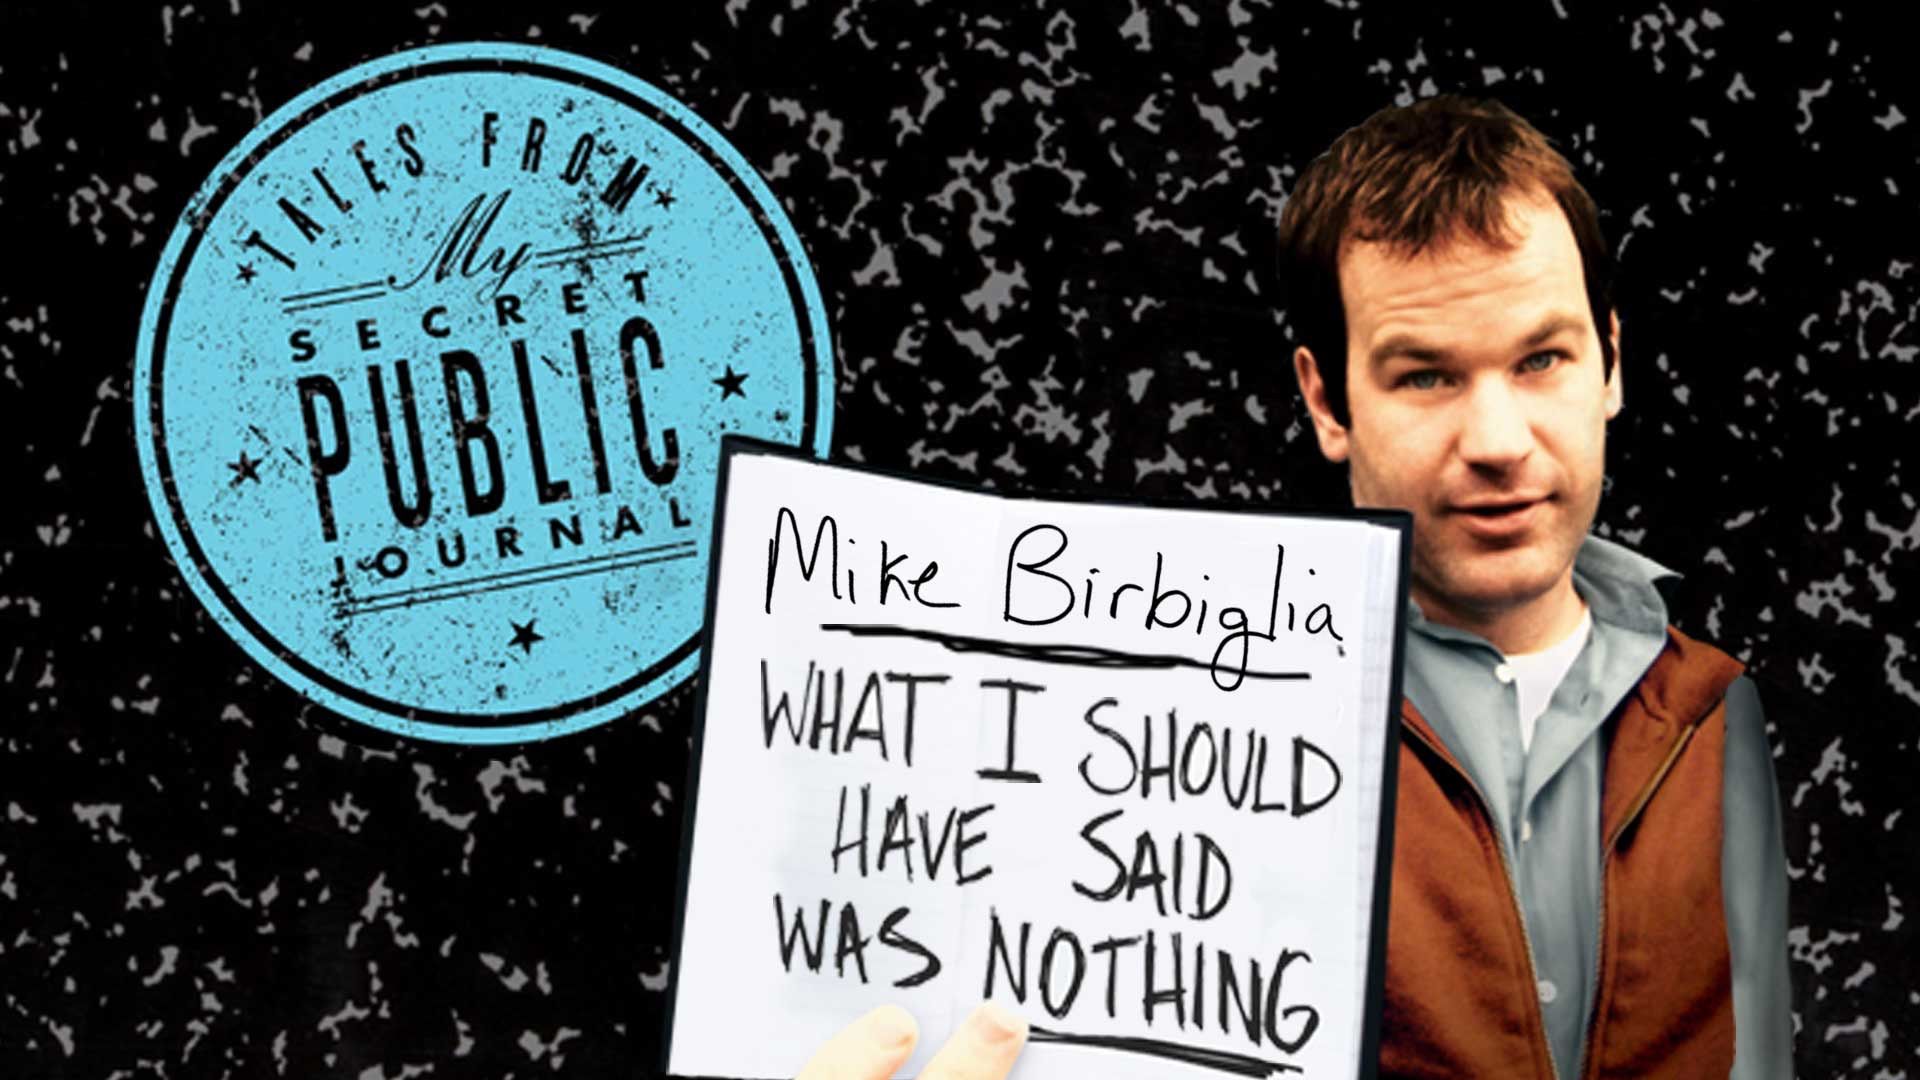 Mike Birbiglia: What I Should Have Said Was Nothing Backdrop